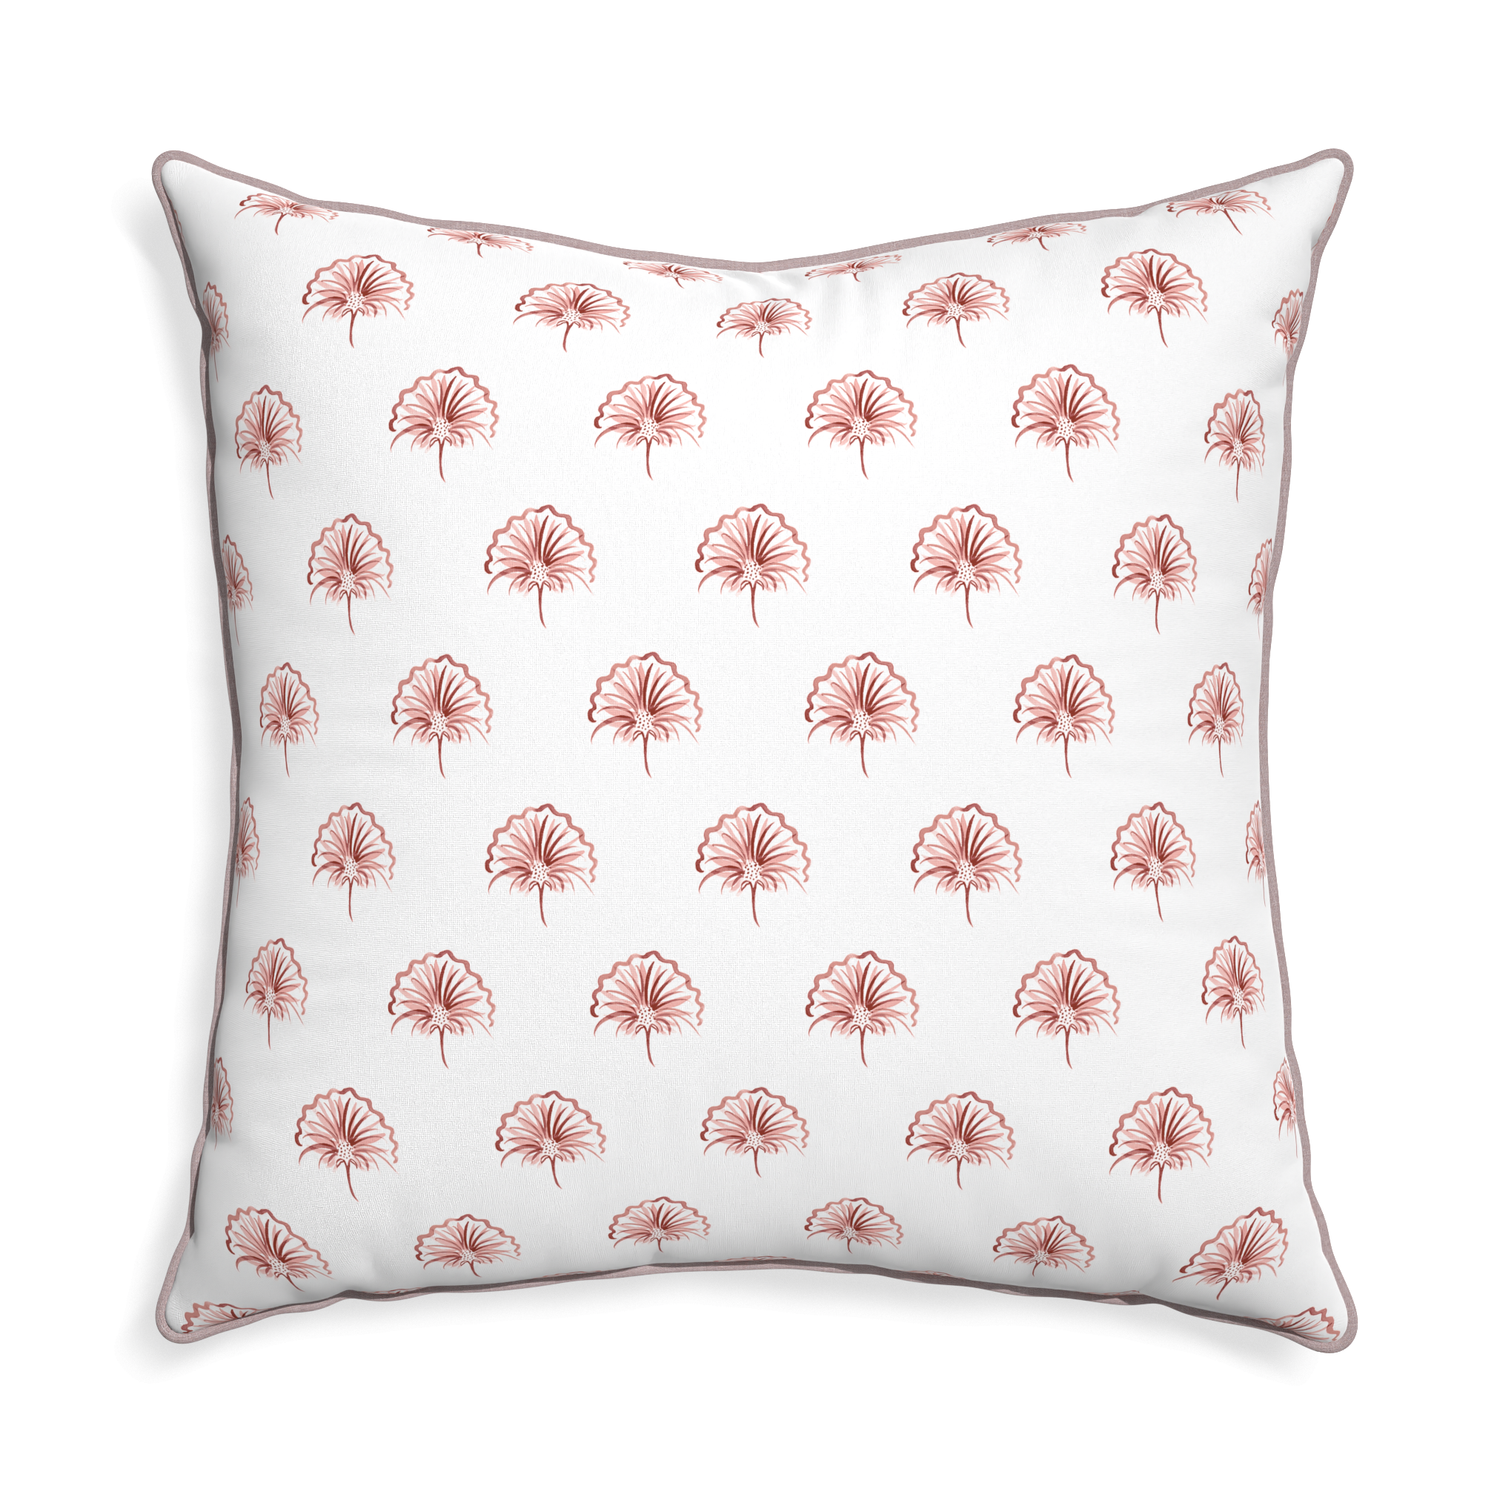 Euro-sham penelope rose custom floral pinkpillow with orchid piping on white background